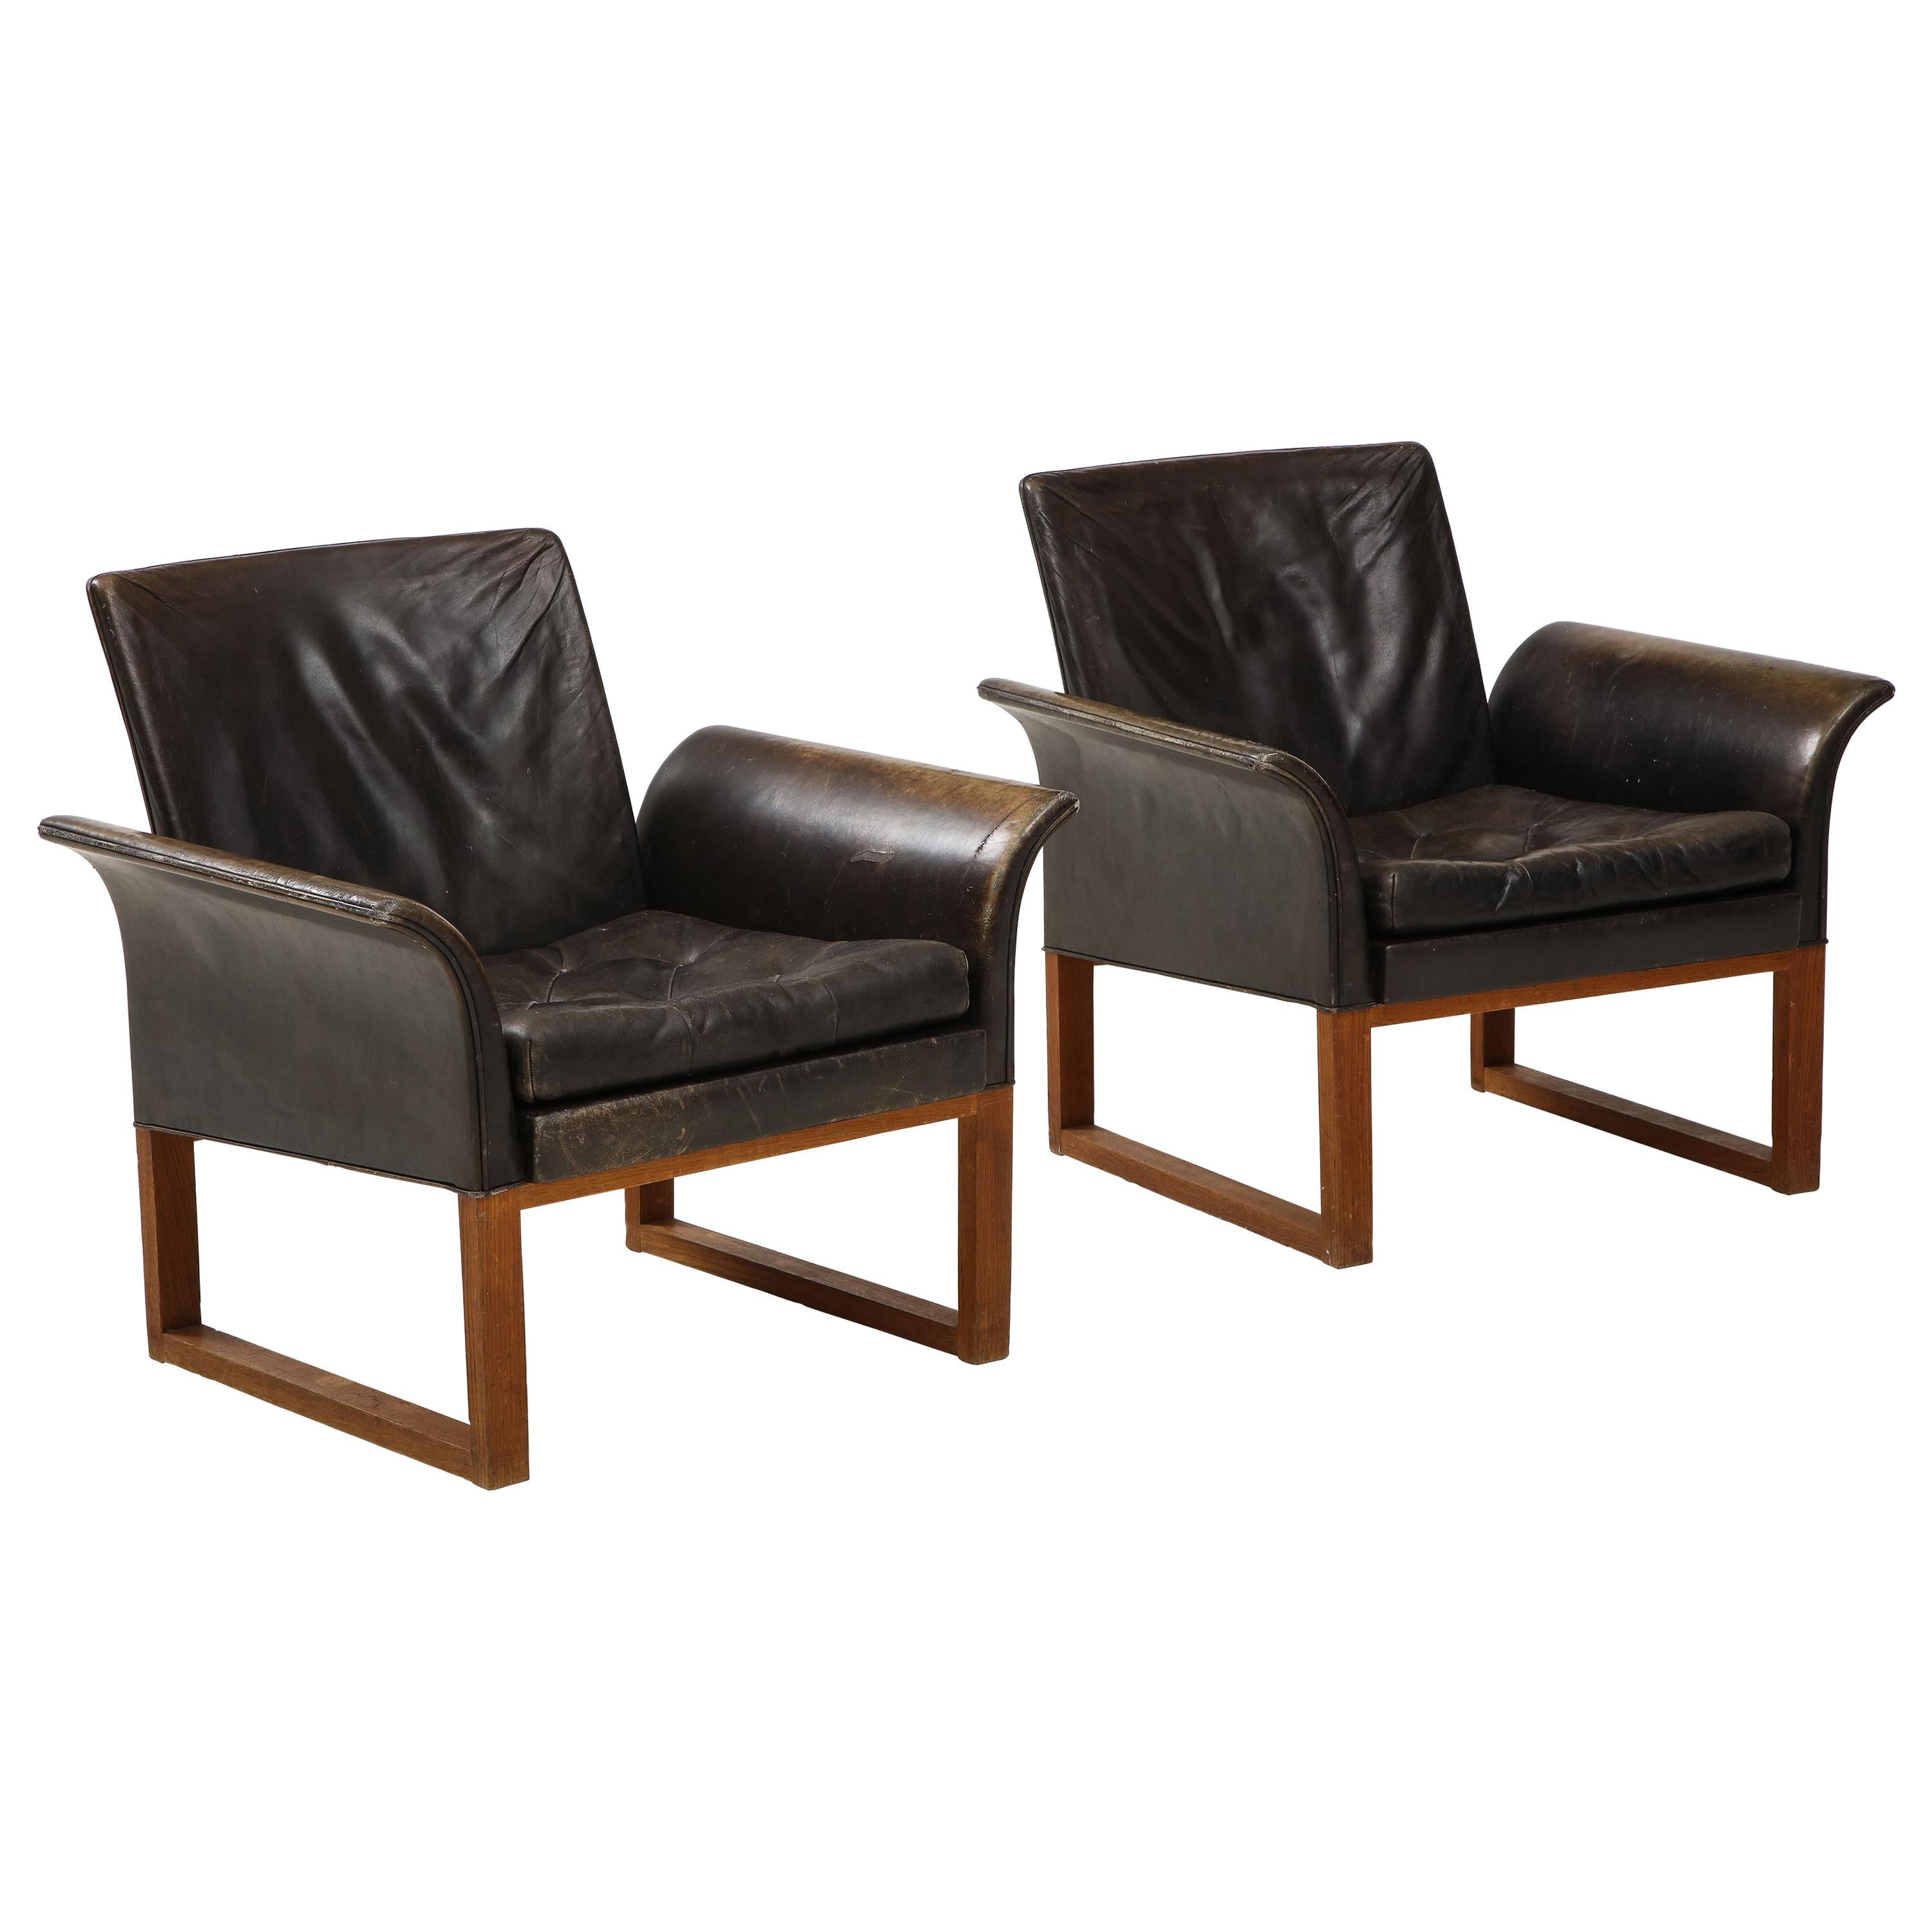 Pair of Rare Mid-Century Leather Club Chairs, Sweden, circa 1950s